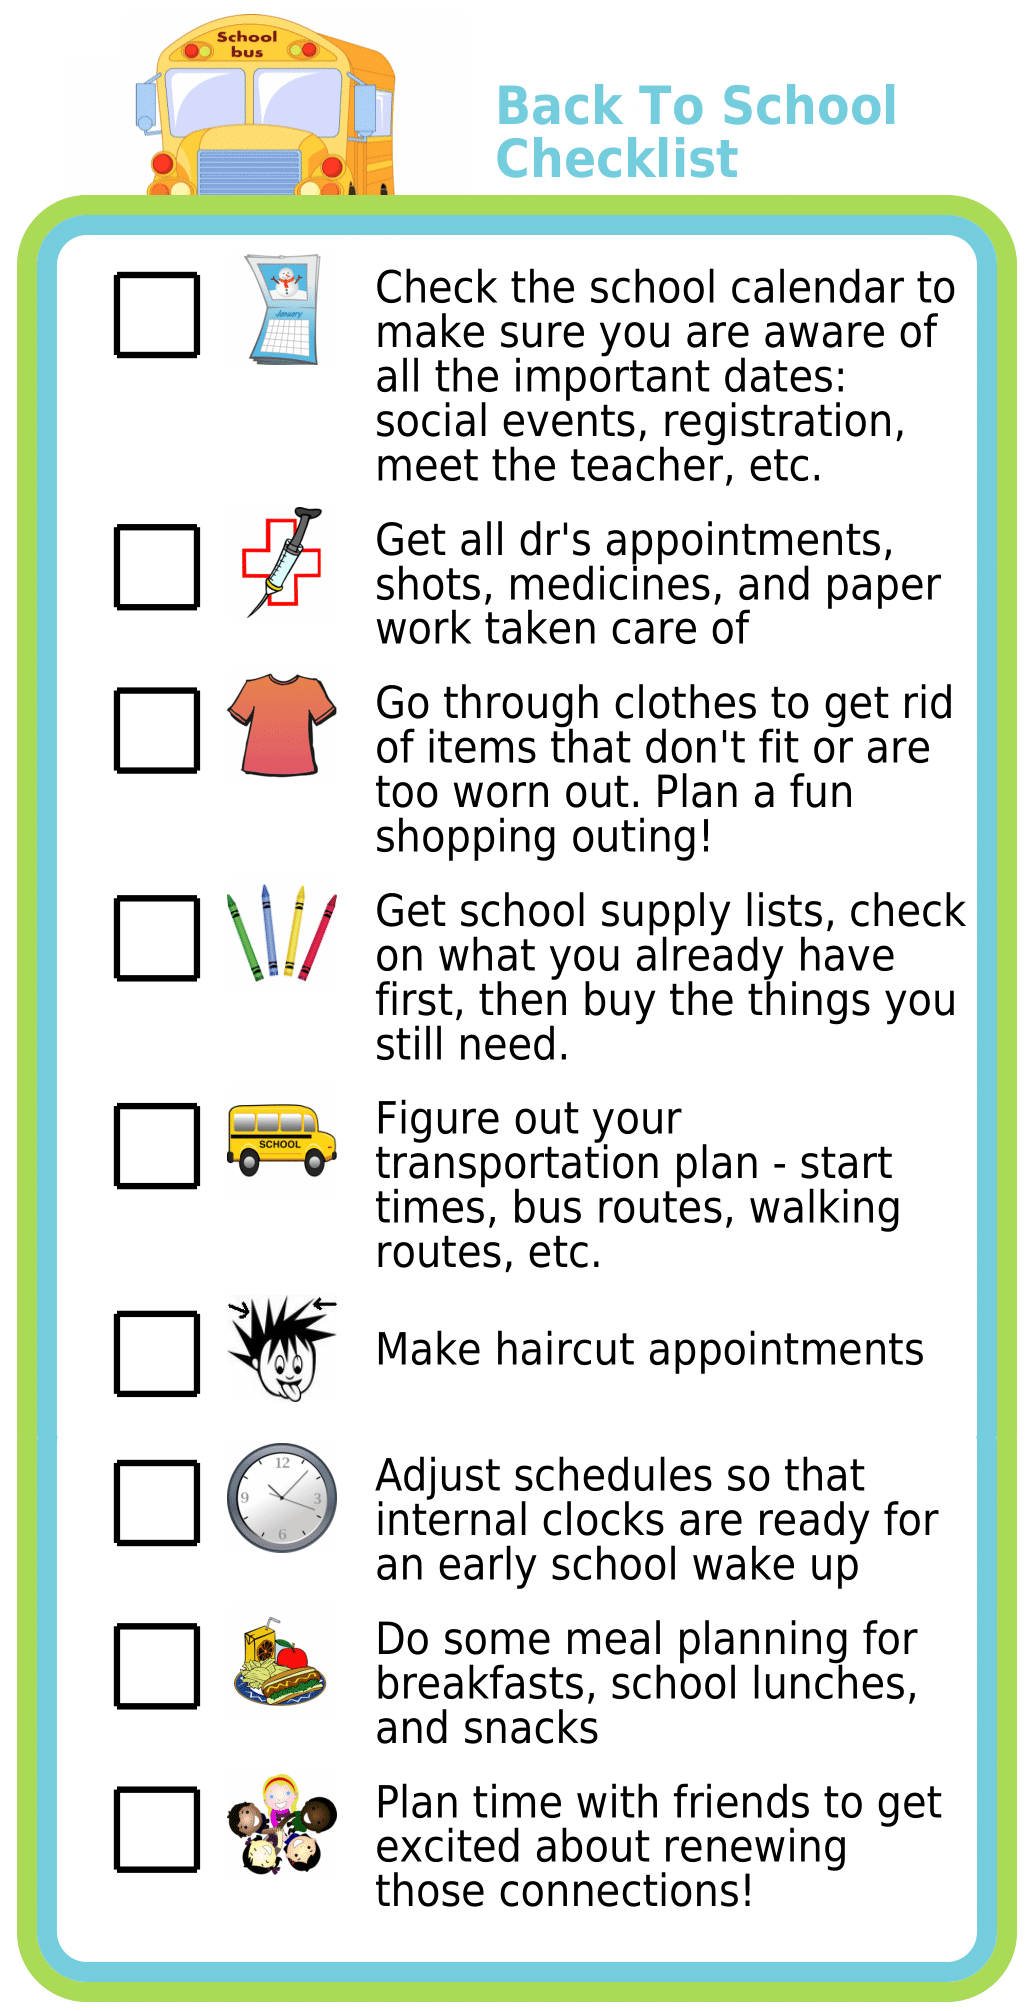 Back to school picture checklist for parents